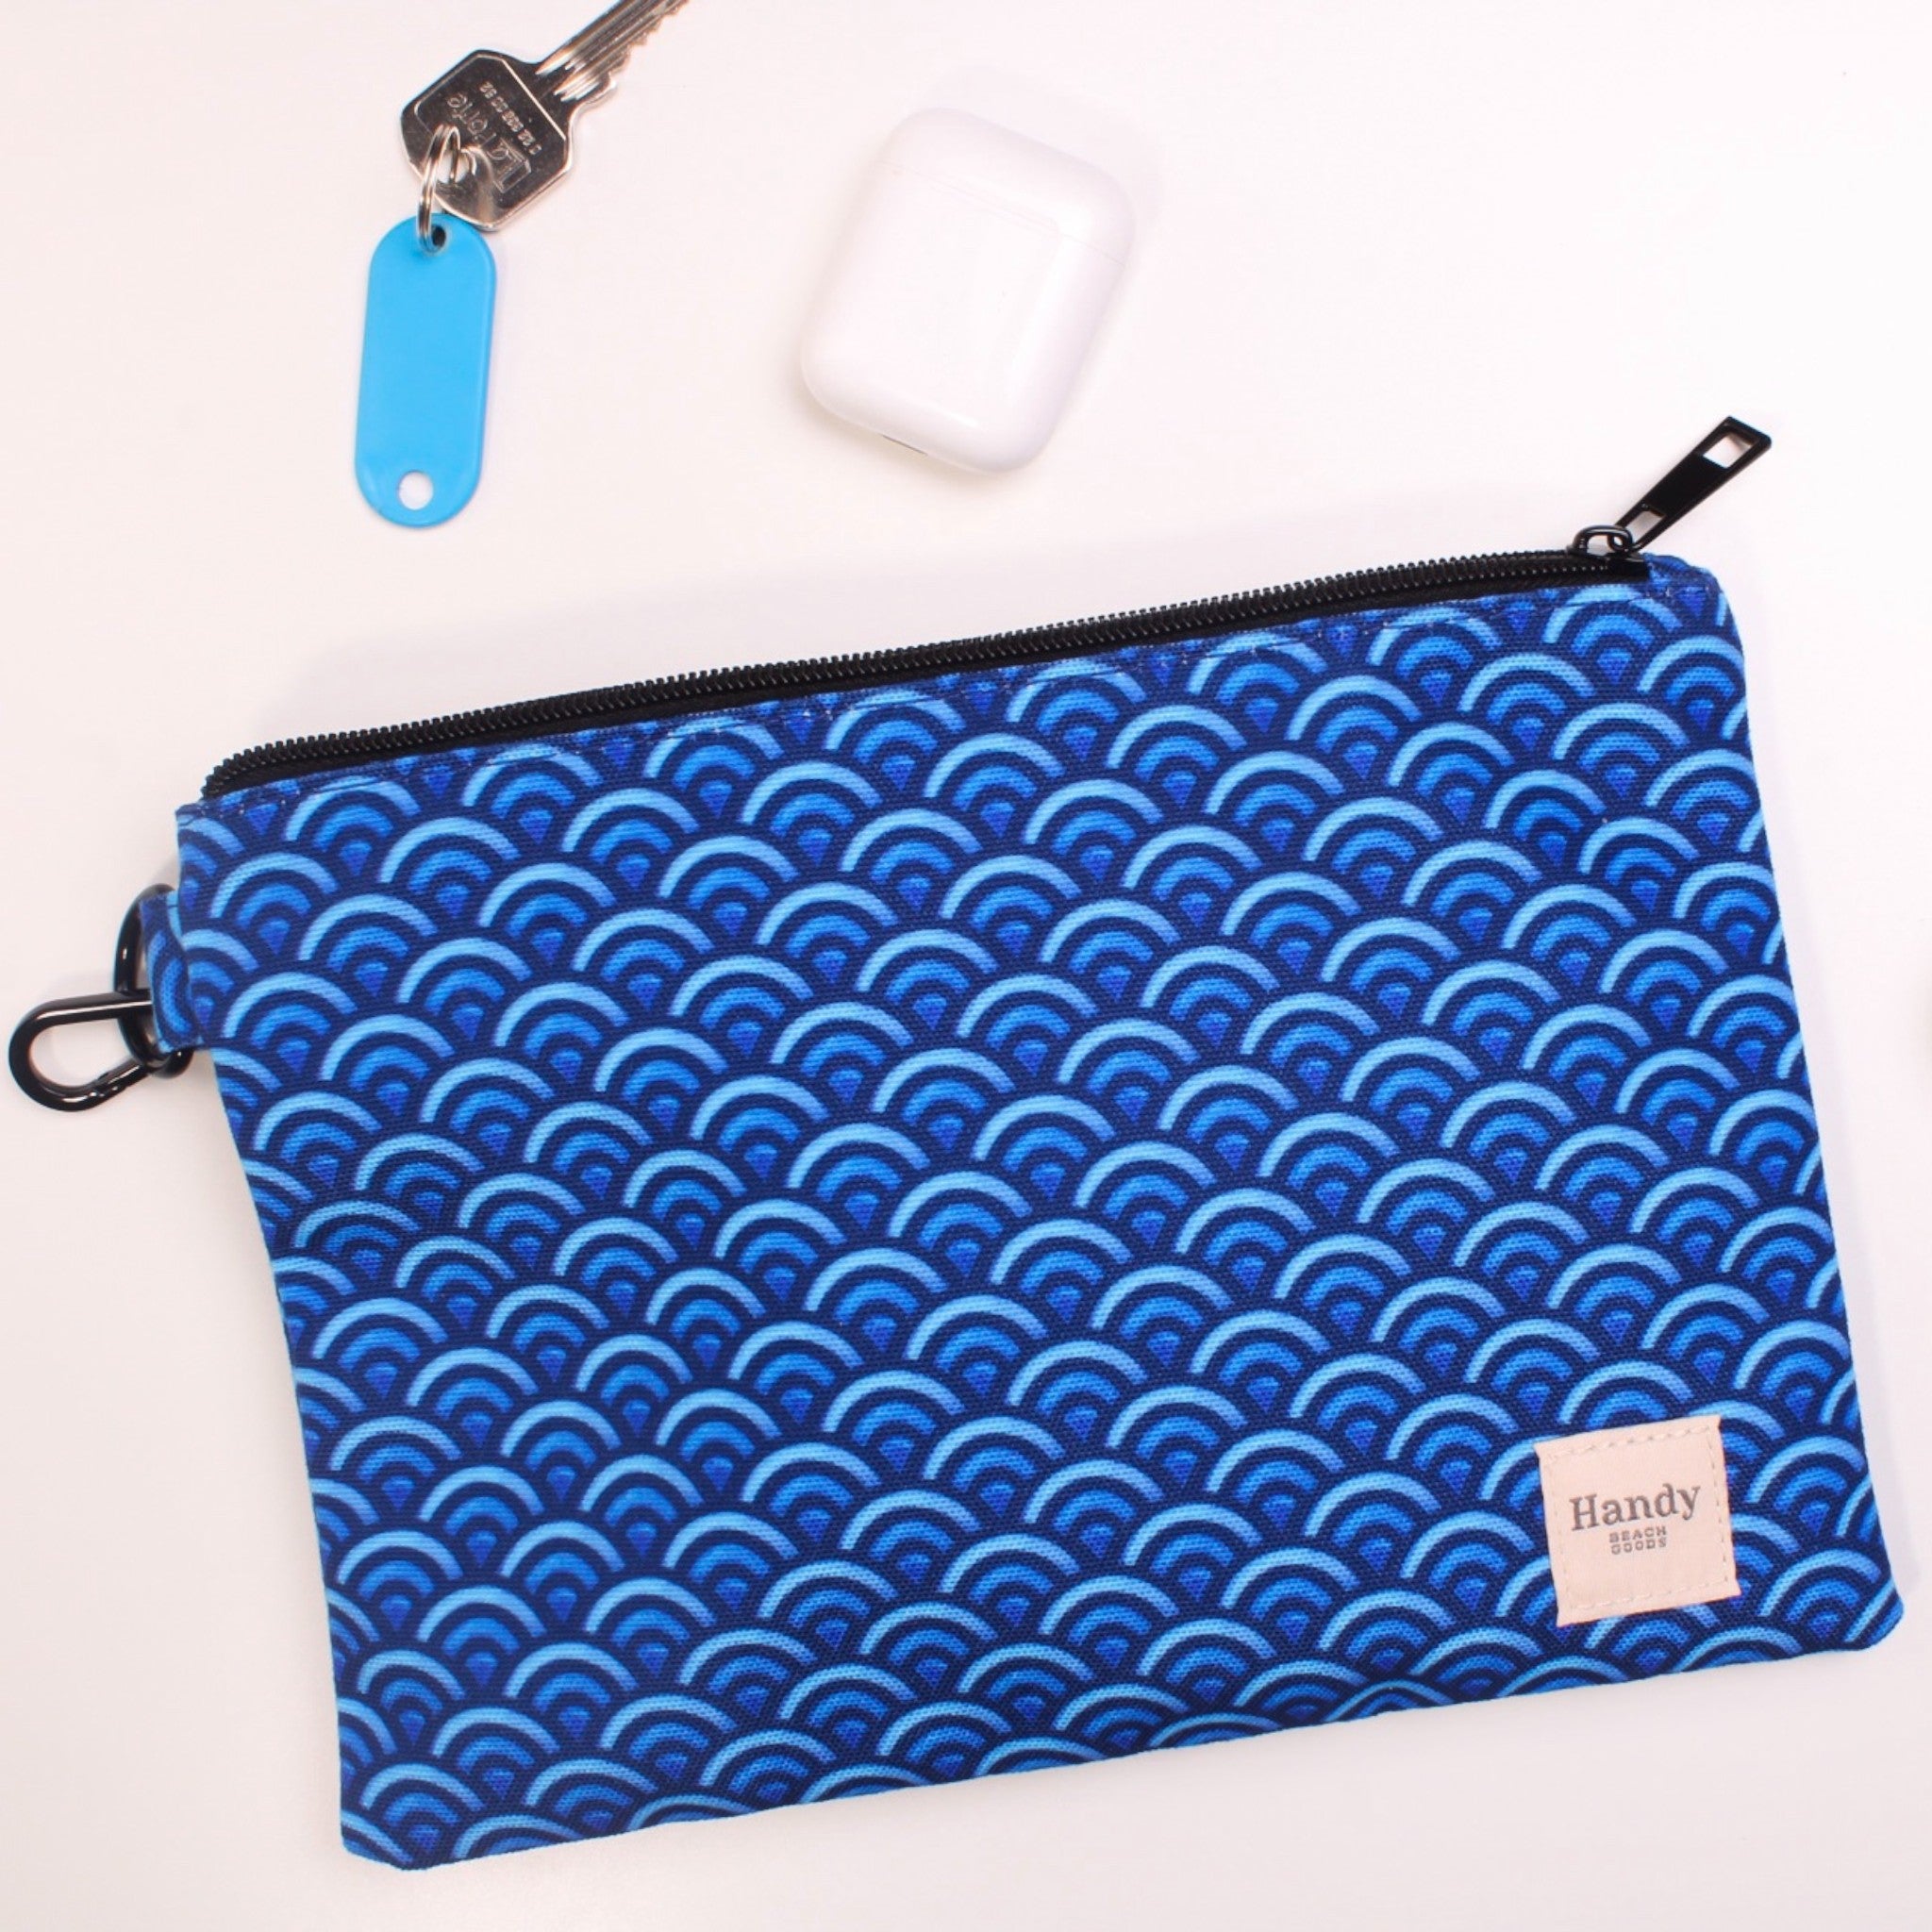 DEEP BLUE - POUCH WITH WRISTLET BUCKLE